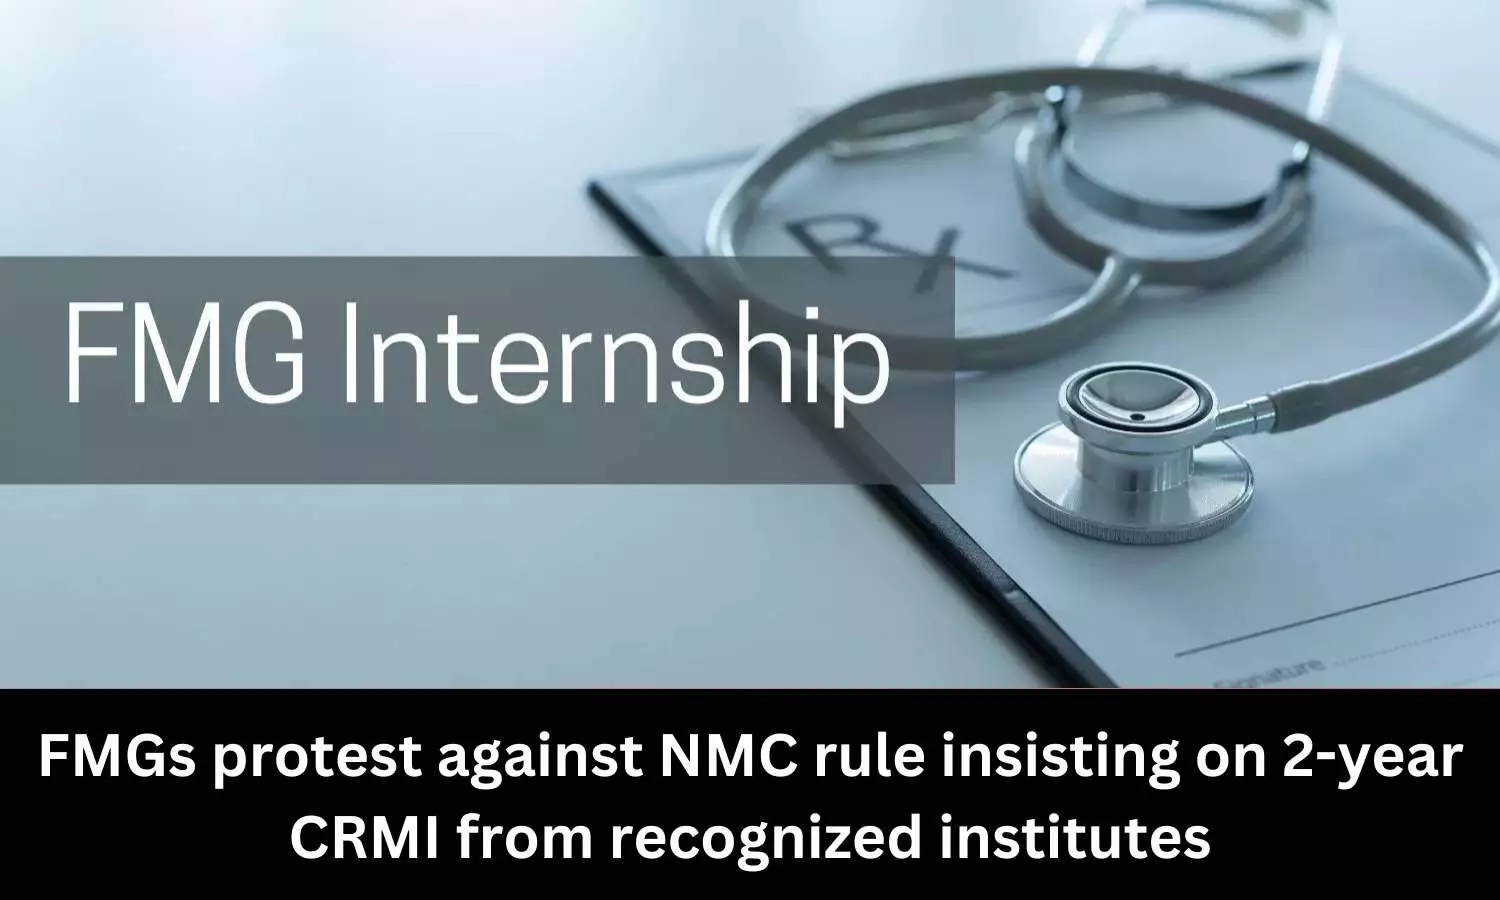 FMGs protest against NMC rule insisting on 2-year CRMI from recognized institutes